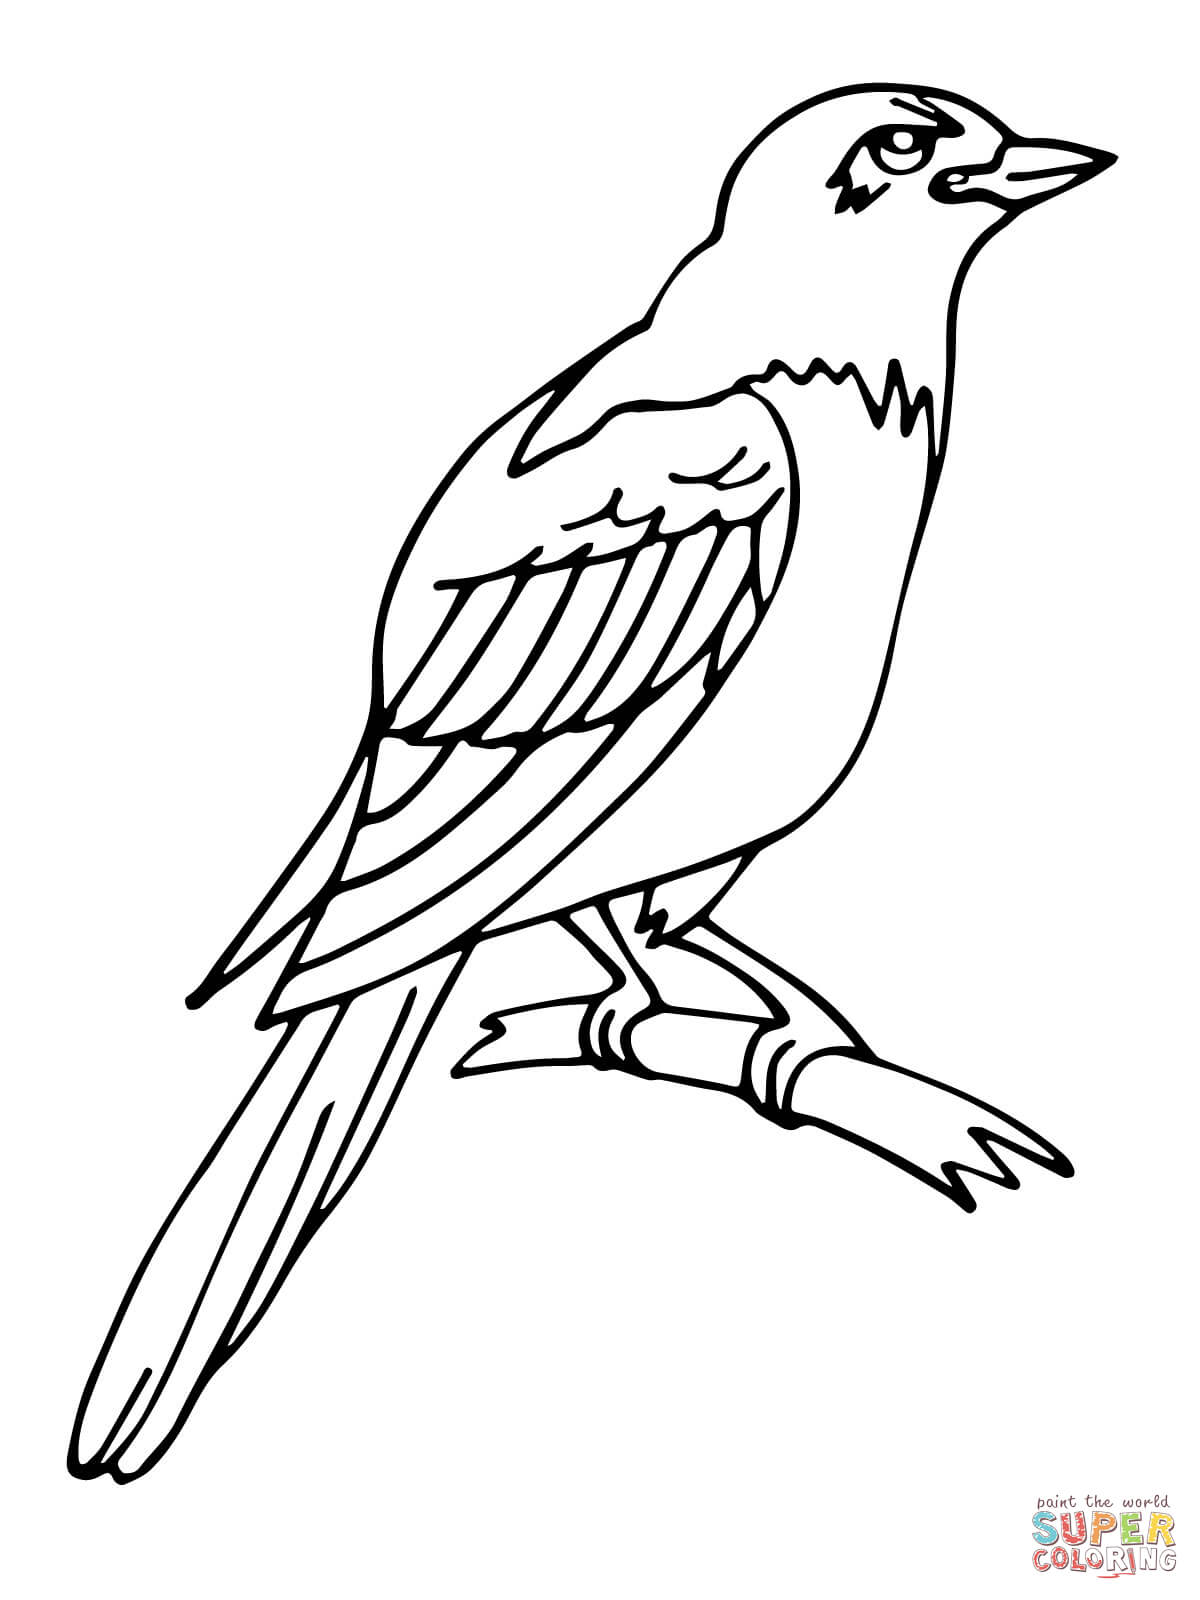 Magpie coloring #12, Download drawings